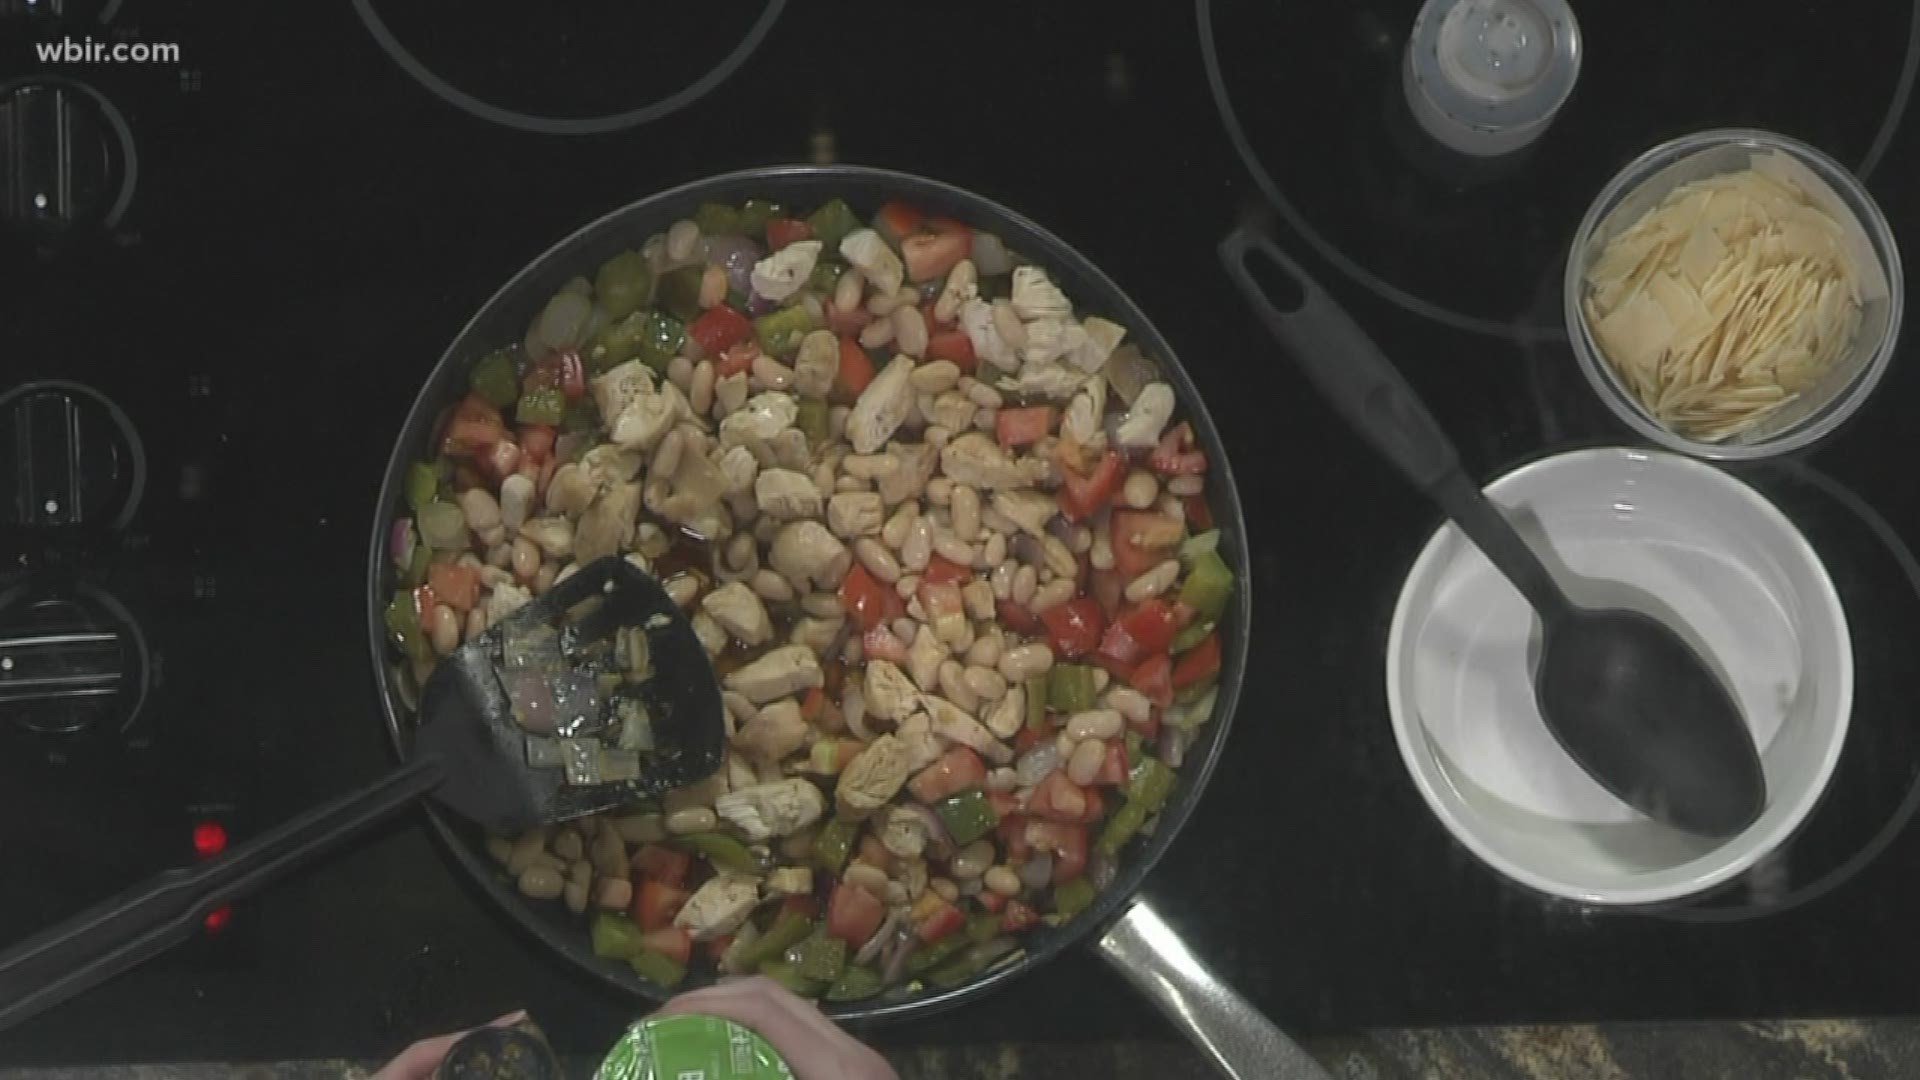 Janet Seiber from the UT Medical Center is with us in the kitchen to make Mediterranean Chicken and Vegetable Sauté.